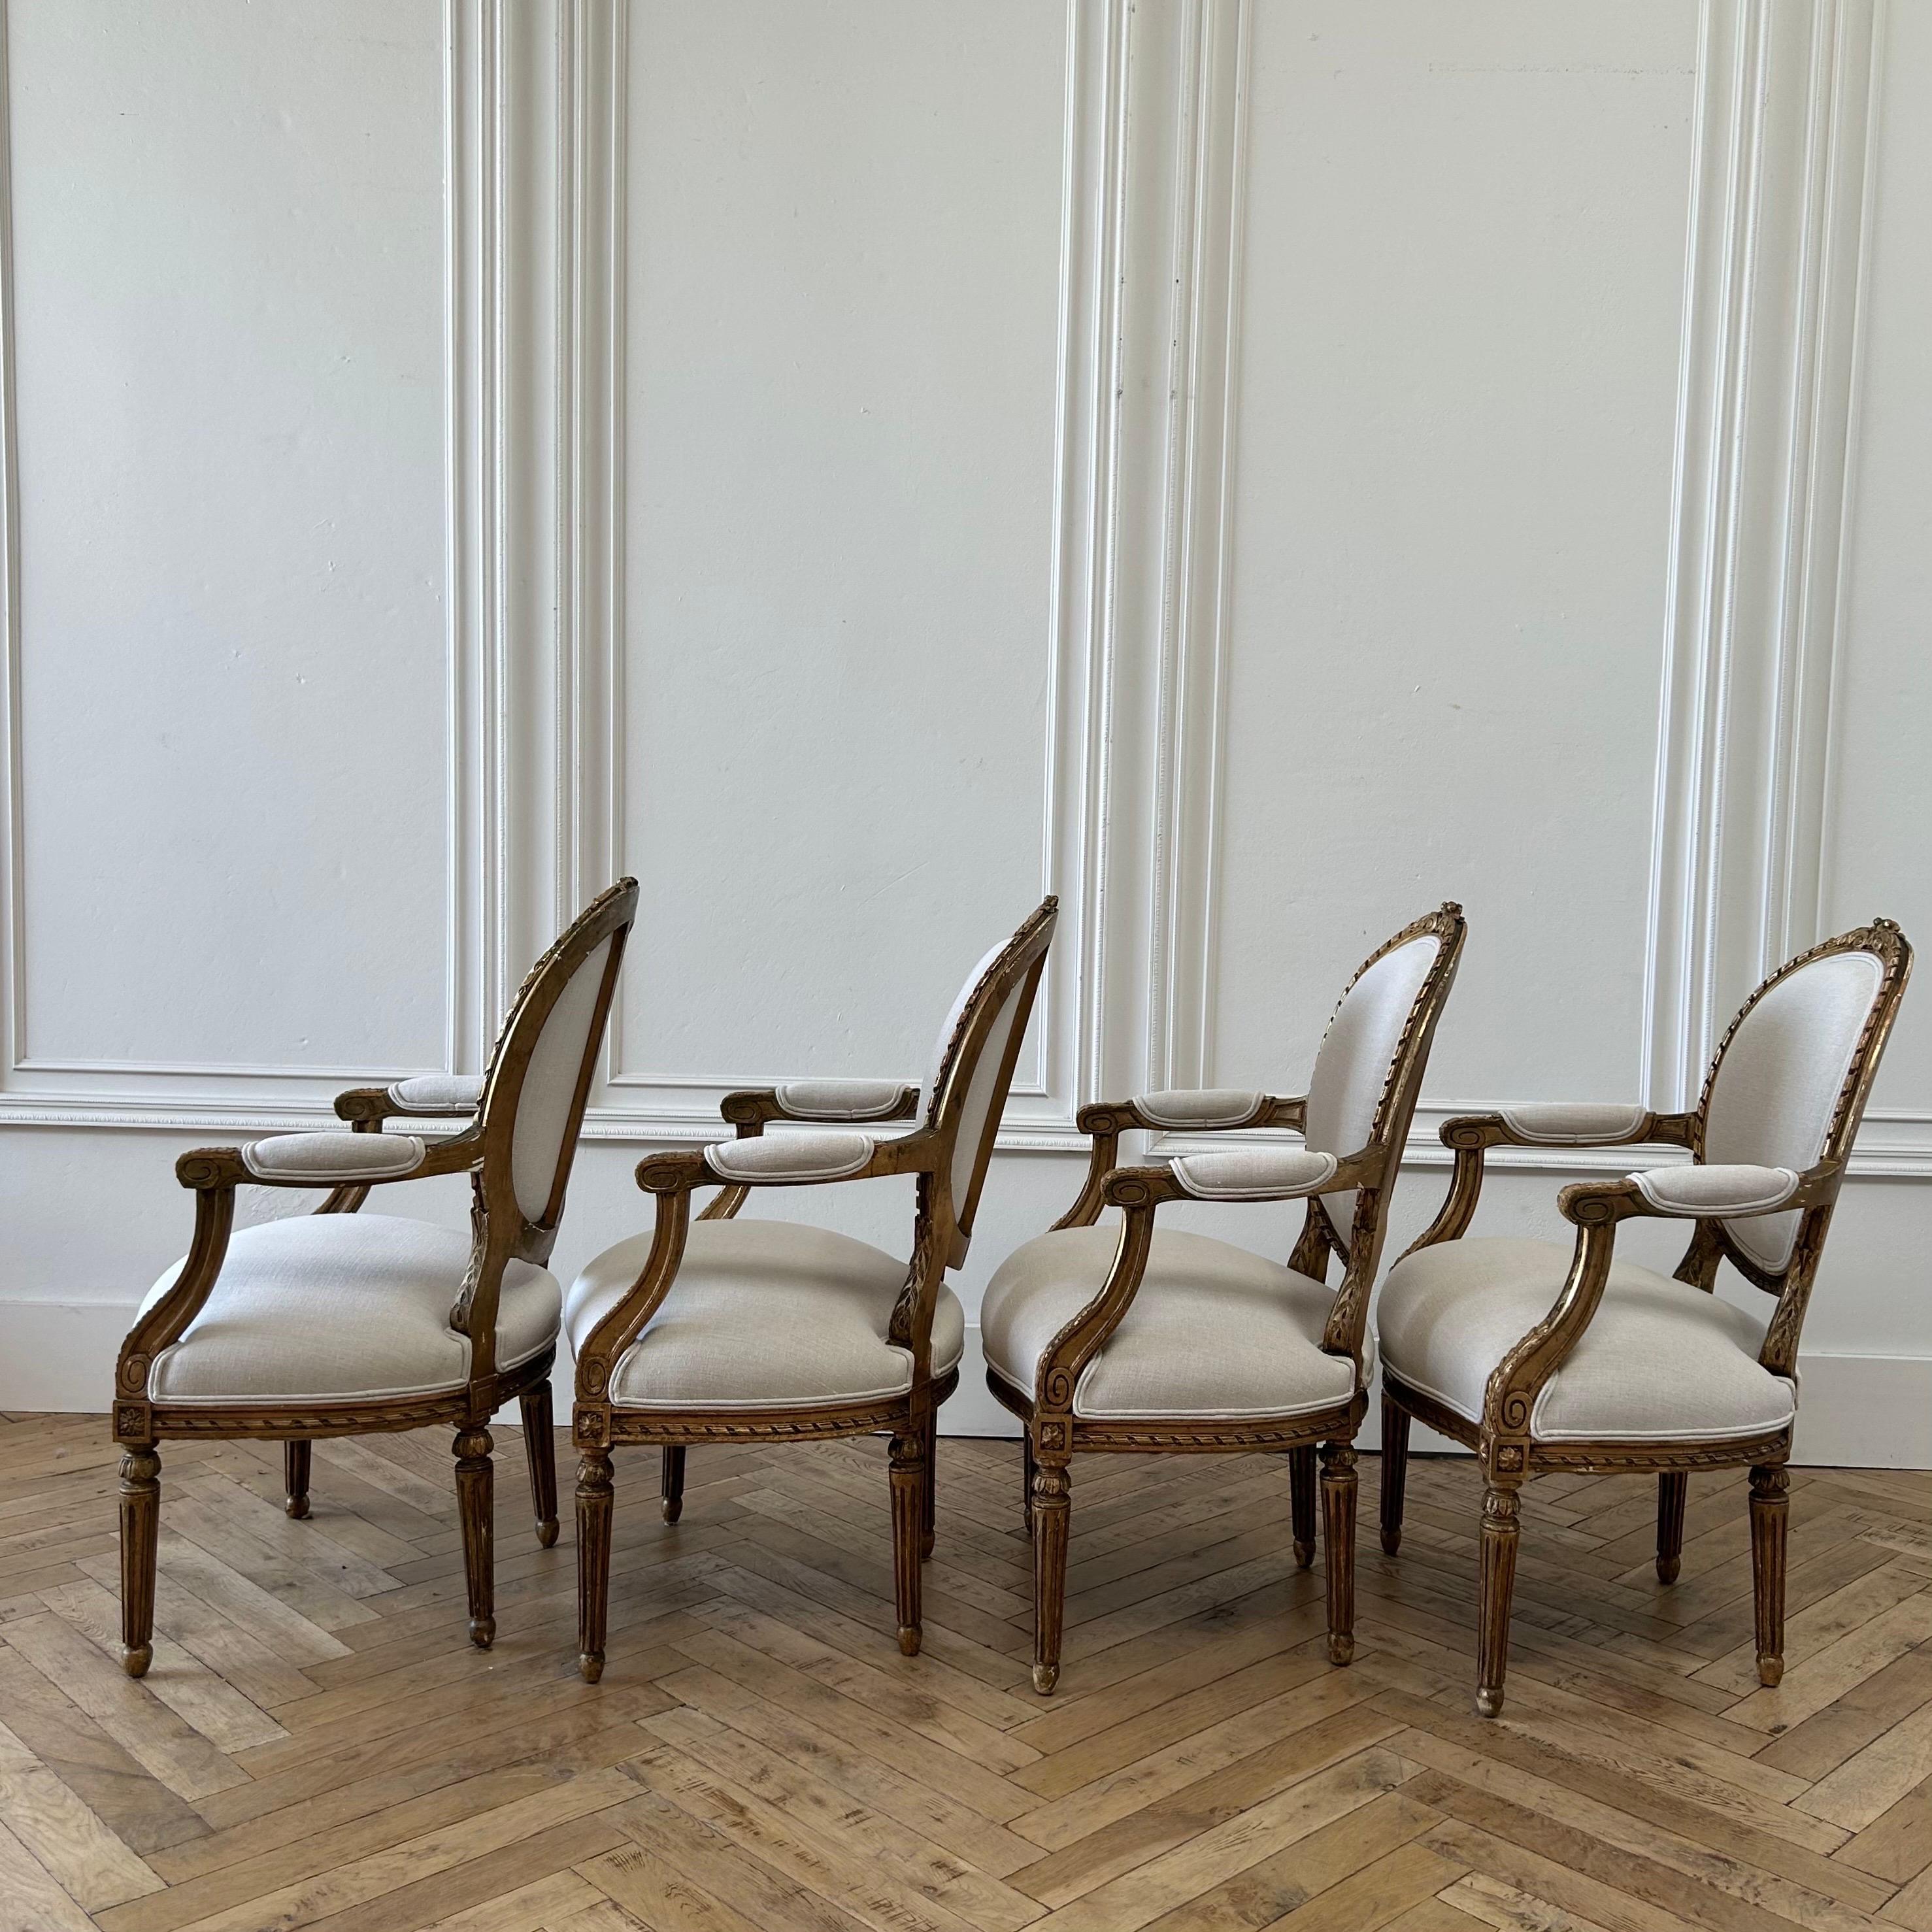 4 beautiful French Louis XVI Style Open arm chairs in original gilt wood finish.
Distressed finish, solid and sturdy ready for daily use.
New upholstery in Libeco oatmeal linen.
Size: 24”w x 24”d x 37”h. 
SH:19”. SD:19”. AH:25”
Sold per Chair.